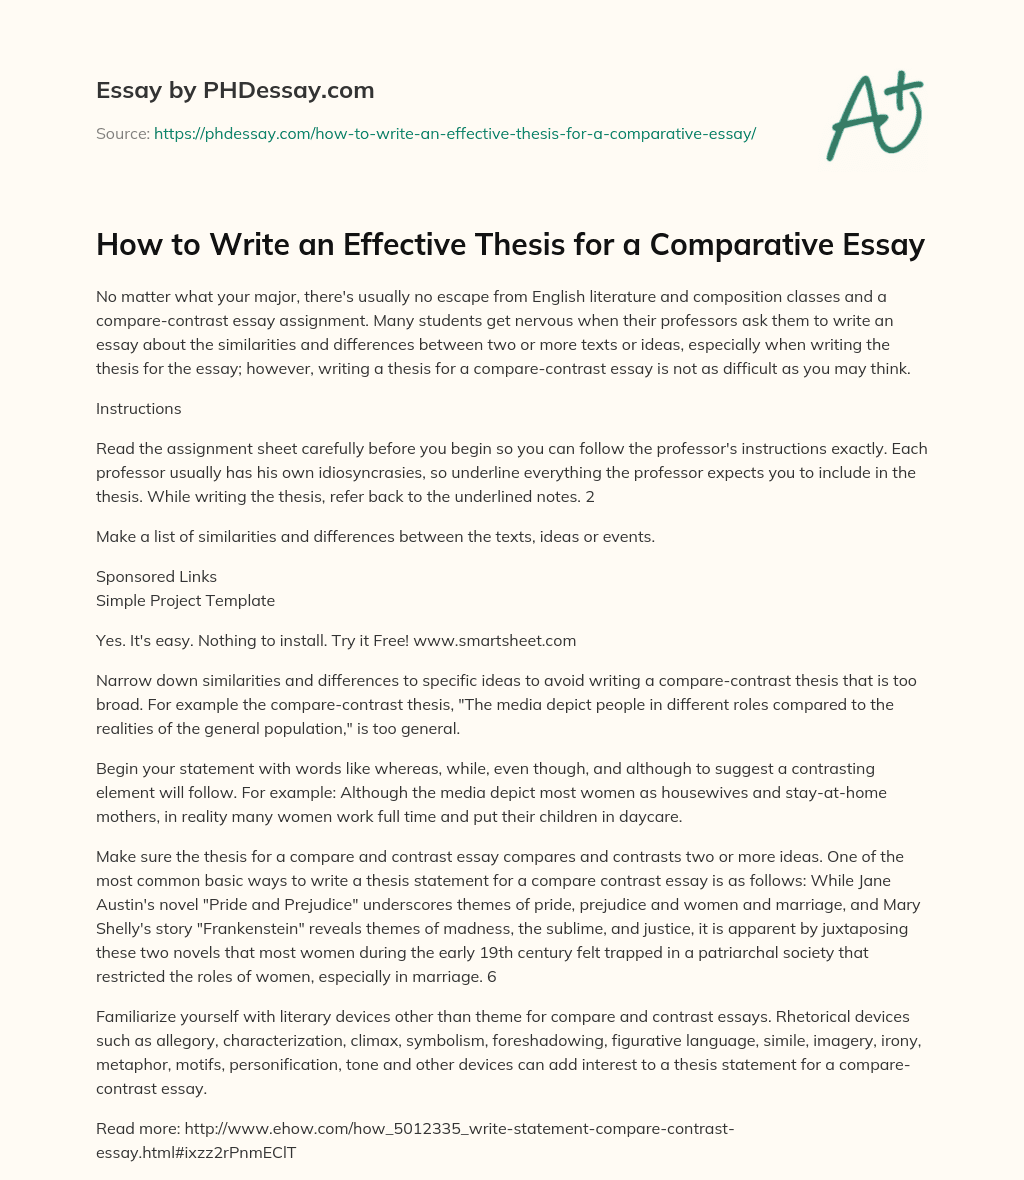 How to Write an Effective Thesis for a Comparative Essay essay